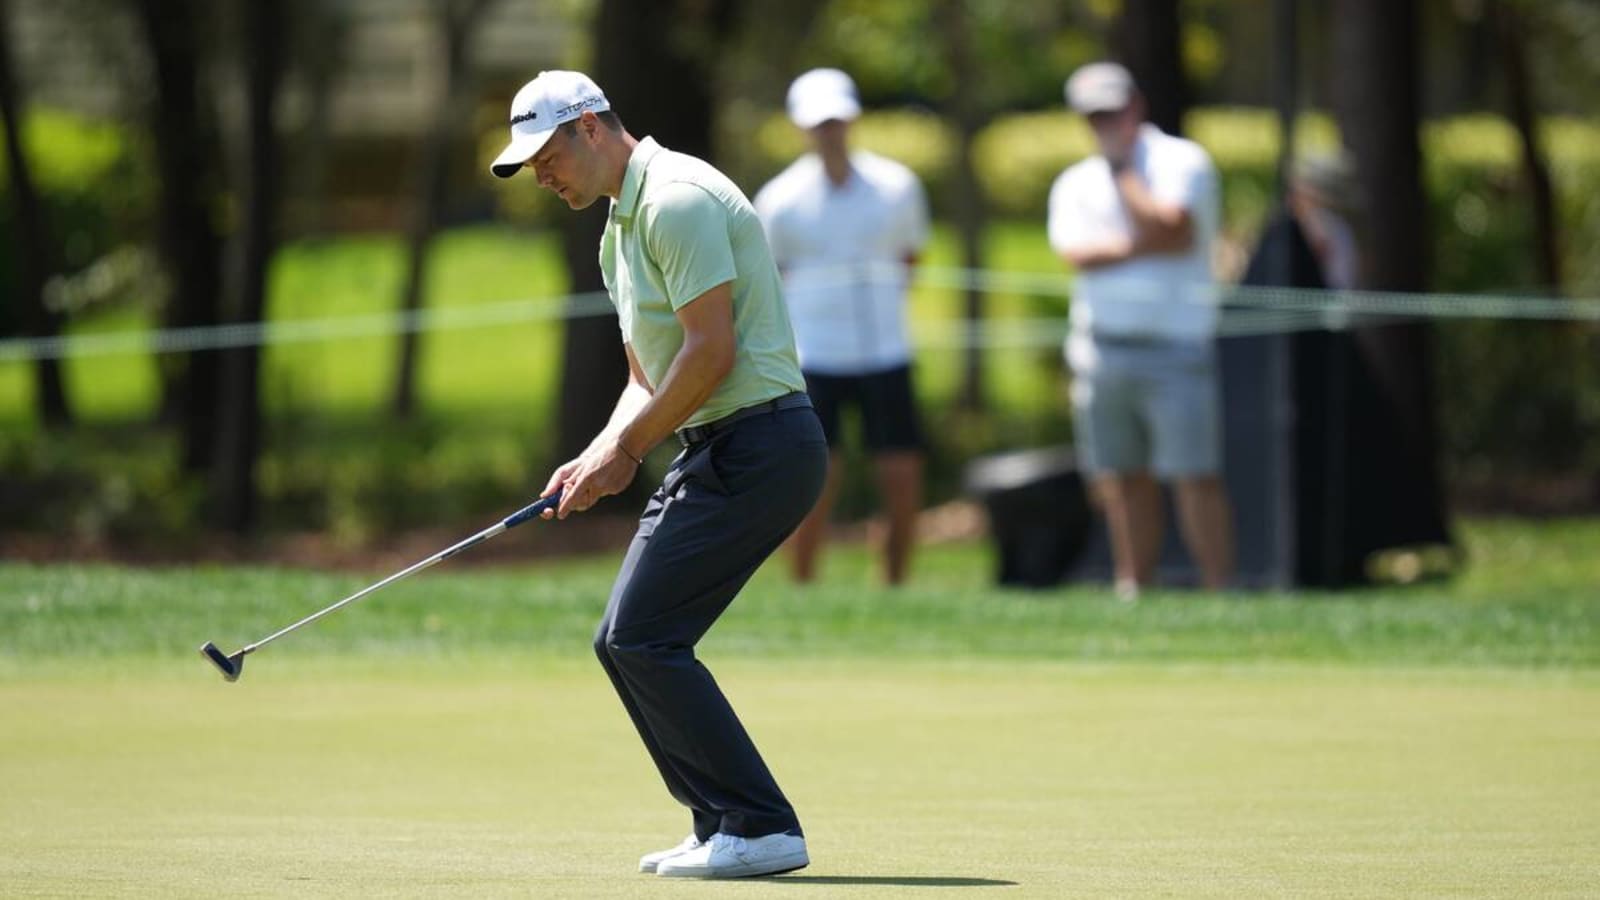 Martin Kaymer at the PGA Championship Live: TV Channel & Streaming Online